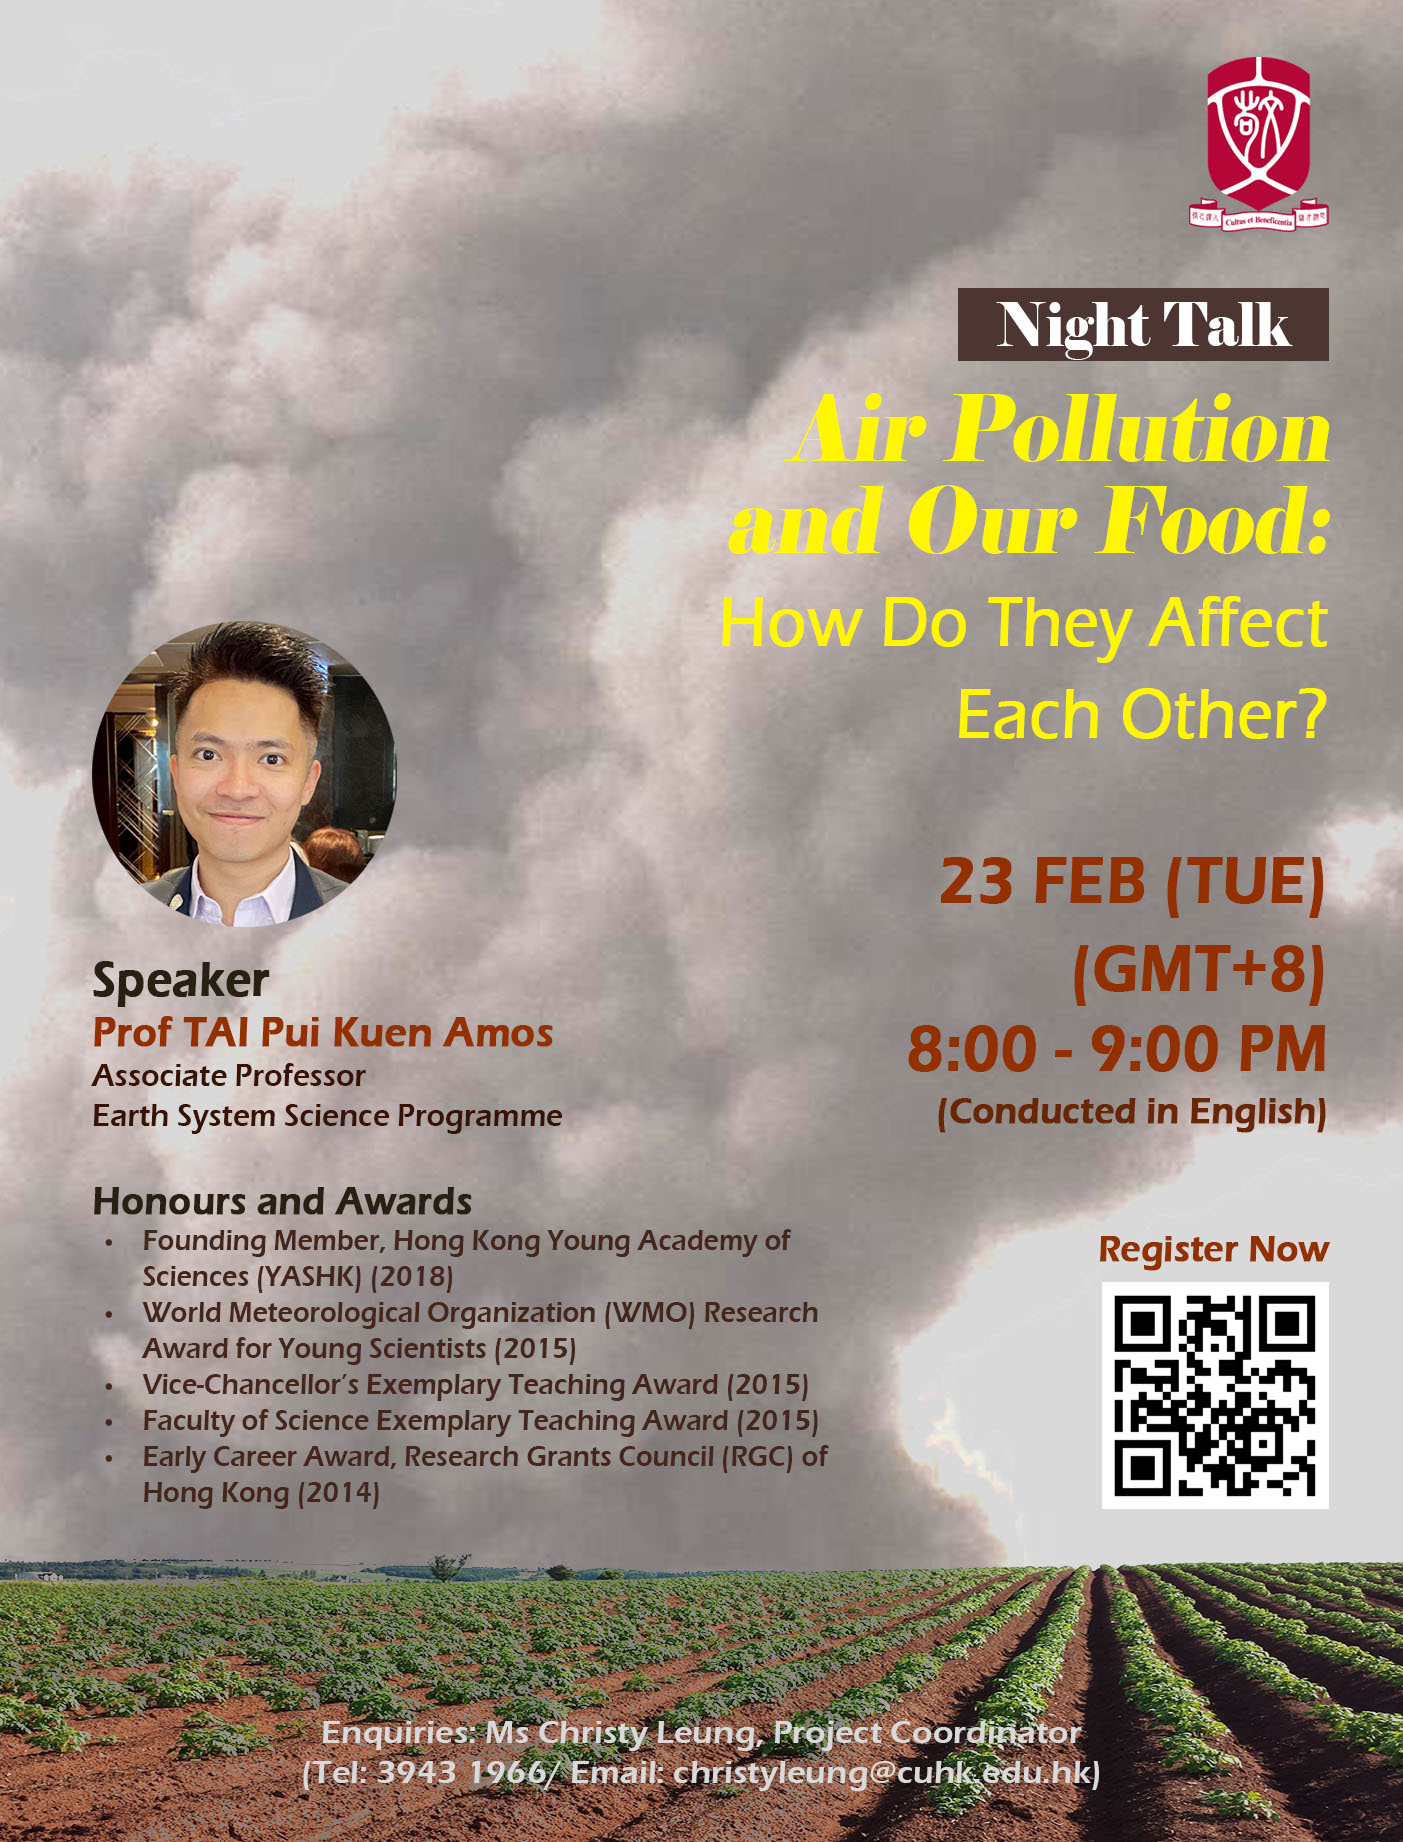 Night Talk—Air Pollution and Our Food: How Do They Affect Each Other?